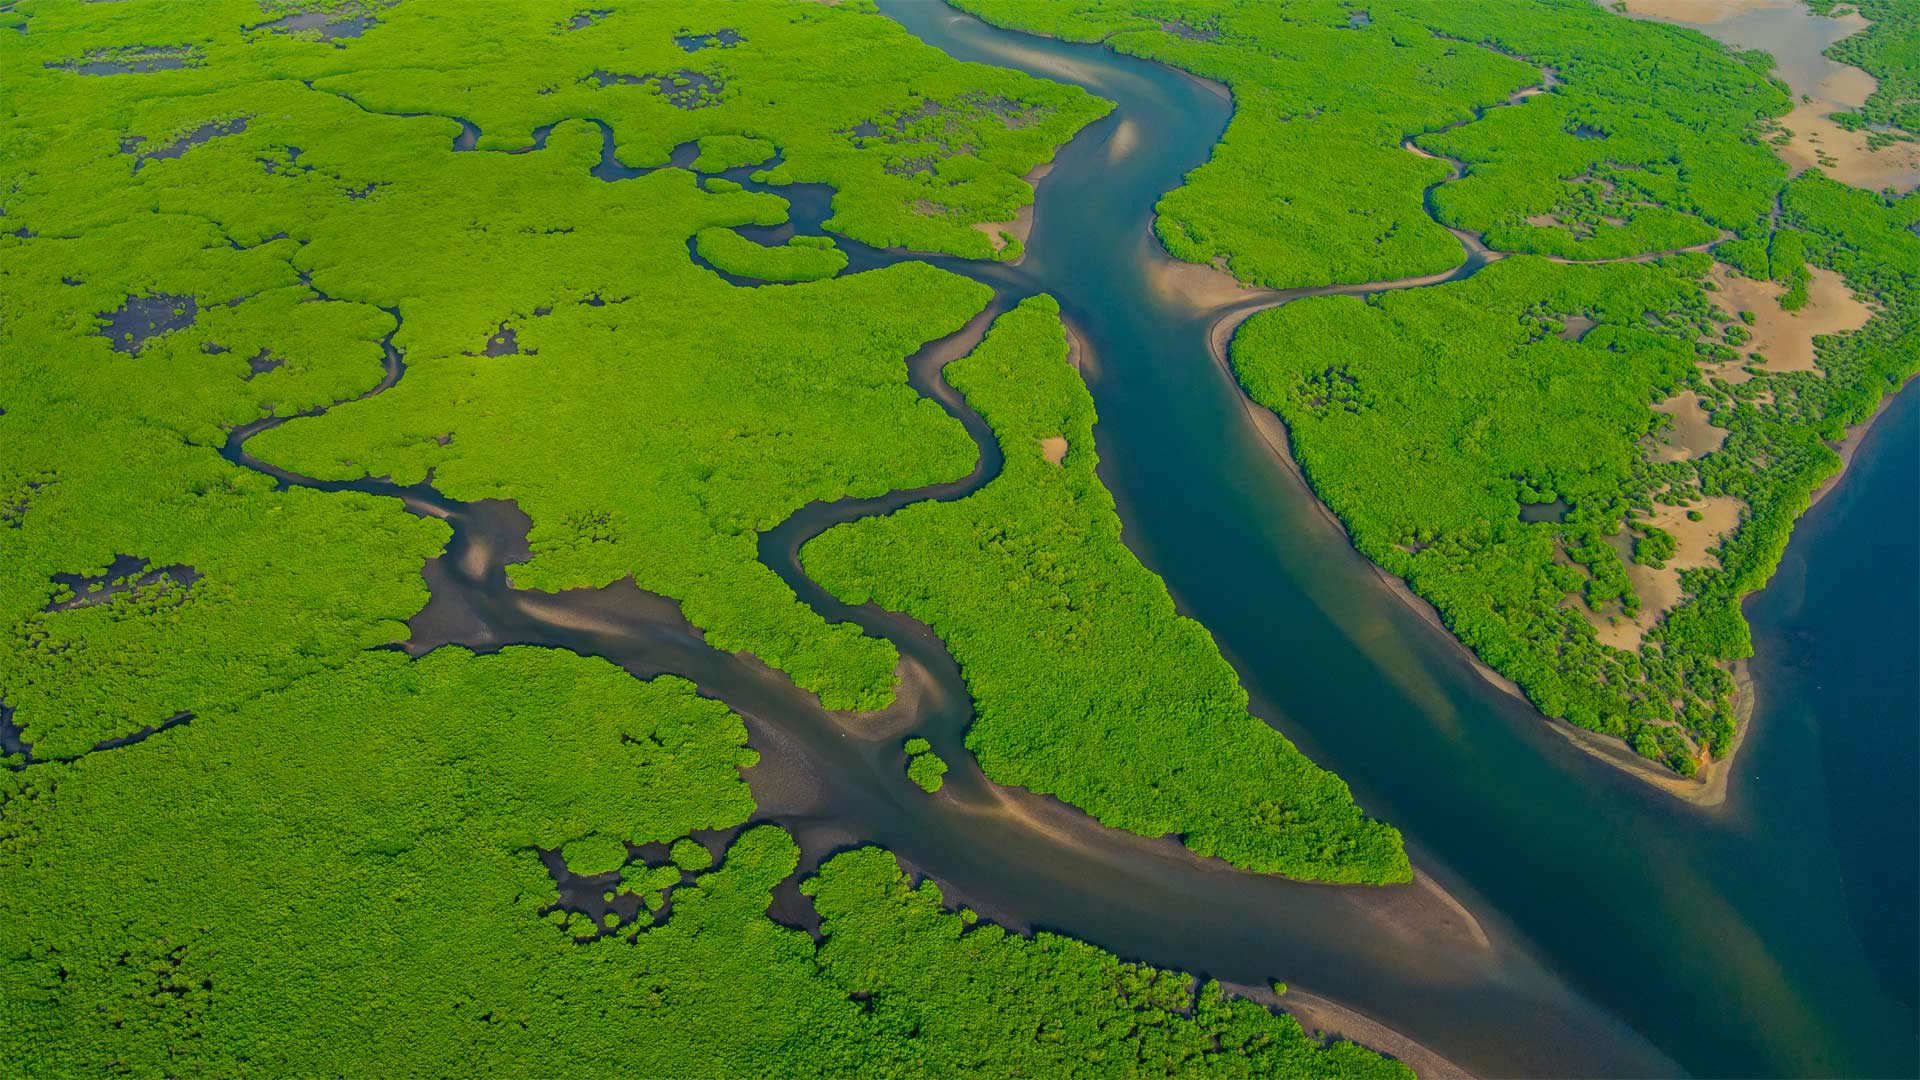 Aerial view of the Amazon River in Brazil - Curioso.Photography/Shutterstock)